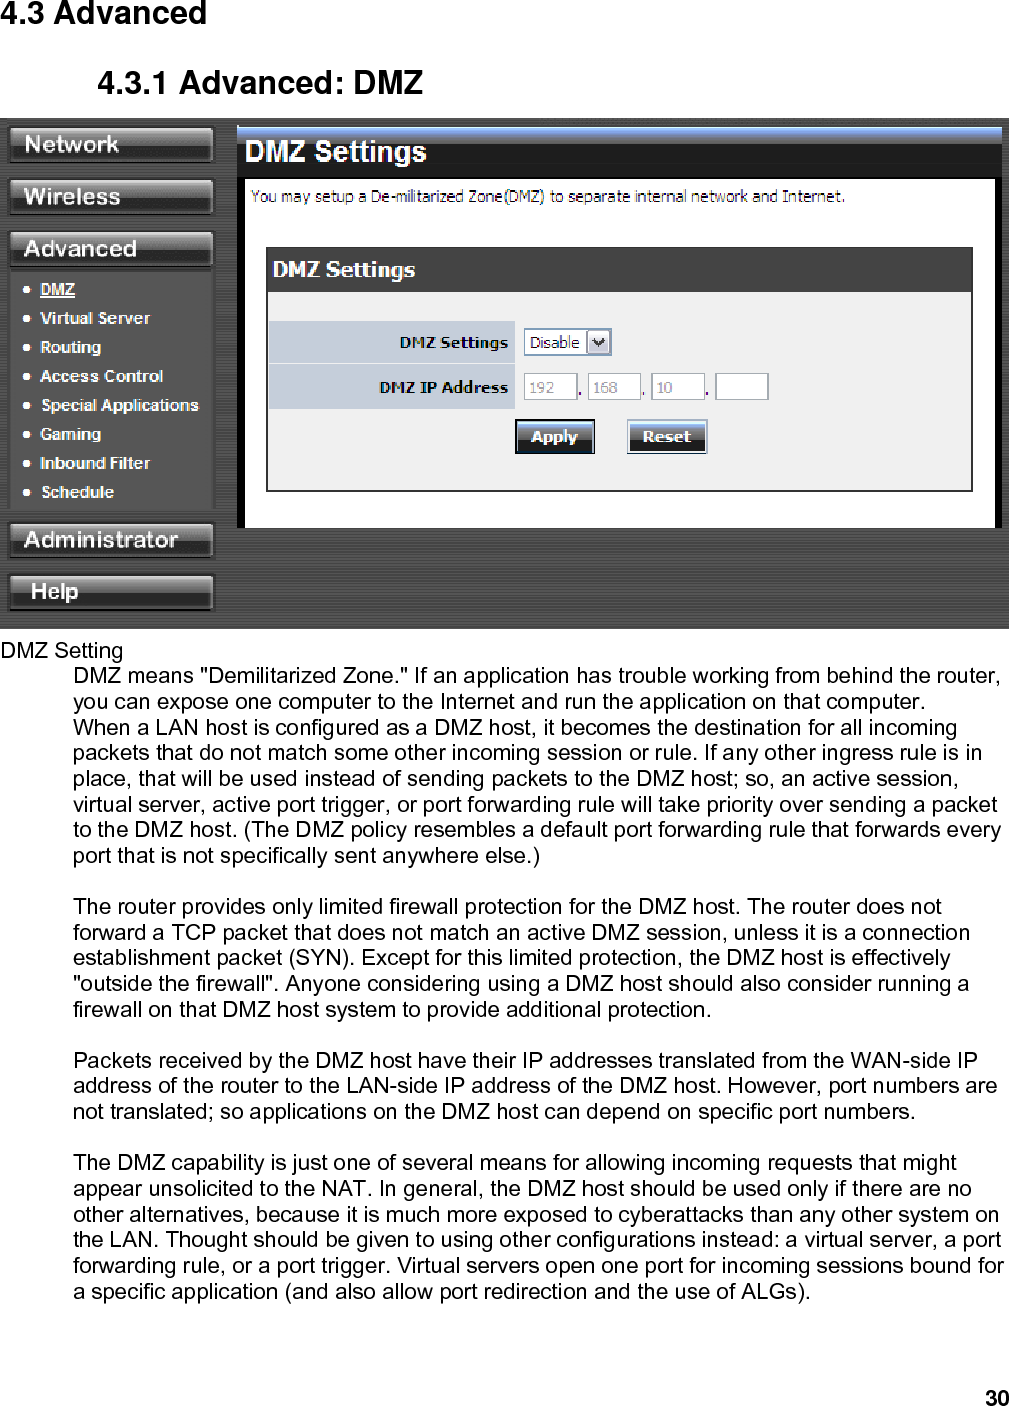 30 4.3 Advanced 4.3.1 Advanced: DMZ  DMZ Setting   DMZ means &quot;Demilitarized Zone.&quot; If an application has trouble working from behind the router, you can expose one computer to the Internet and run the application on that computer.   When a LAN host is configured as a DMZ host, it becomes the destination for all incoming packets that do not match some other incoming session or rule. If any other ingress rule is in place, that will be used instead of sending packets to the DMZ host; so, an active session, virtual server, active port trigger, or port forwarding rule will take priority over sending a packet to the DMZ host. (The DMZ policy resembles a default port forwarding rule that forwards every port that is not specifically sent anywhere else.)    The router provides only limited firewall protection for the DMZ host. The router does not forward a TCP packet that does not match an active DMZ session, unless it is a connection establishment packet (SYN). Except for this limited protection, the DMZ host is effectively &quot;outside the firewall&quot;. Anyone considering using a DMZ host should also consider running a firewall on that DMZ host system to provide additional protection.    Packets received by the DMZ host have their IP addresses translated from the WAN-side IP address of the router to the LAN-side IP address of the DMZ host. However, port numbers are not translated; so applications on the DMZ host can depend on specific port numbers.    The DMZ capability is just one of several means for allowing incoming requests that might appear unsolicited to the NAT. In general, the DMZ host should be used only if there are no other alternatives, because it is much more exposed to cyberattacks than any other system on the LAN. Thought should be given to using other configurations instead: a virtual server, a port forwarding rule, or a port trigger. Virtual servers open one port for incoming sessions bound for a specific application (and also allow port redirection and the use of ALGs).     